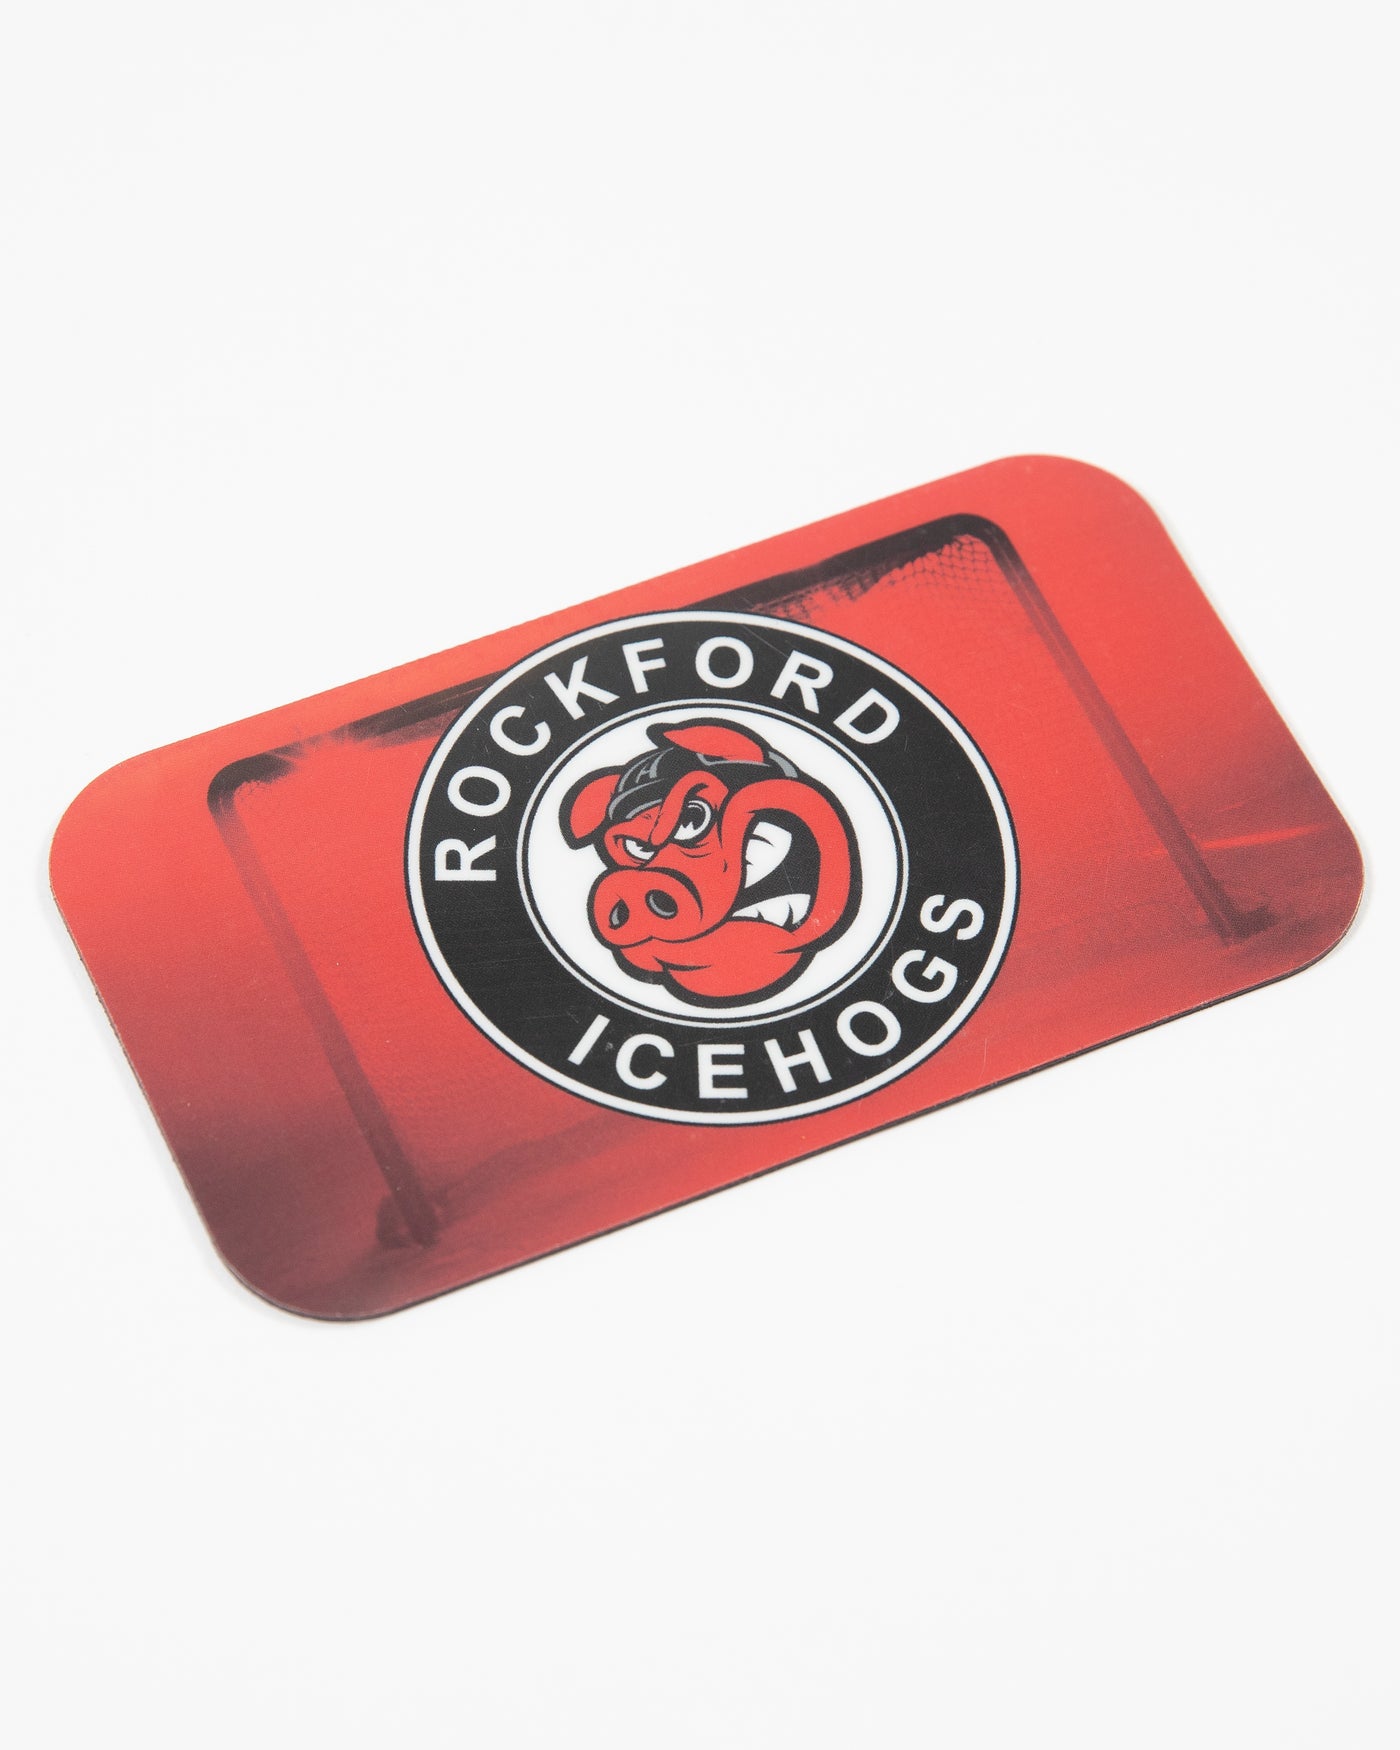 Red Rockford IceHogs magnet with classic logo and Hammy - angled lay flat